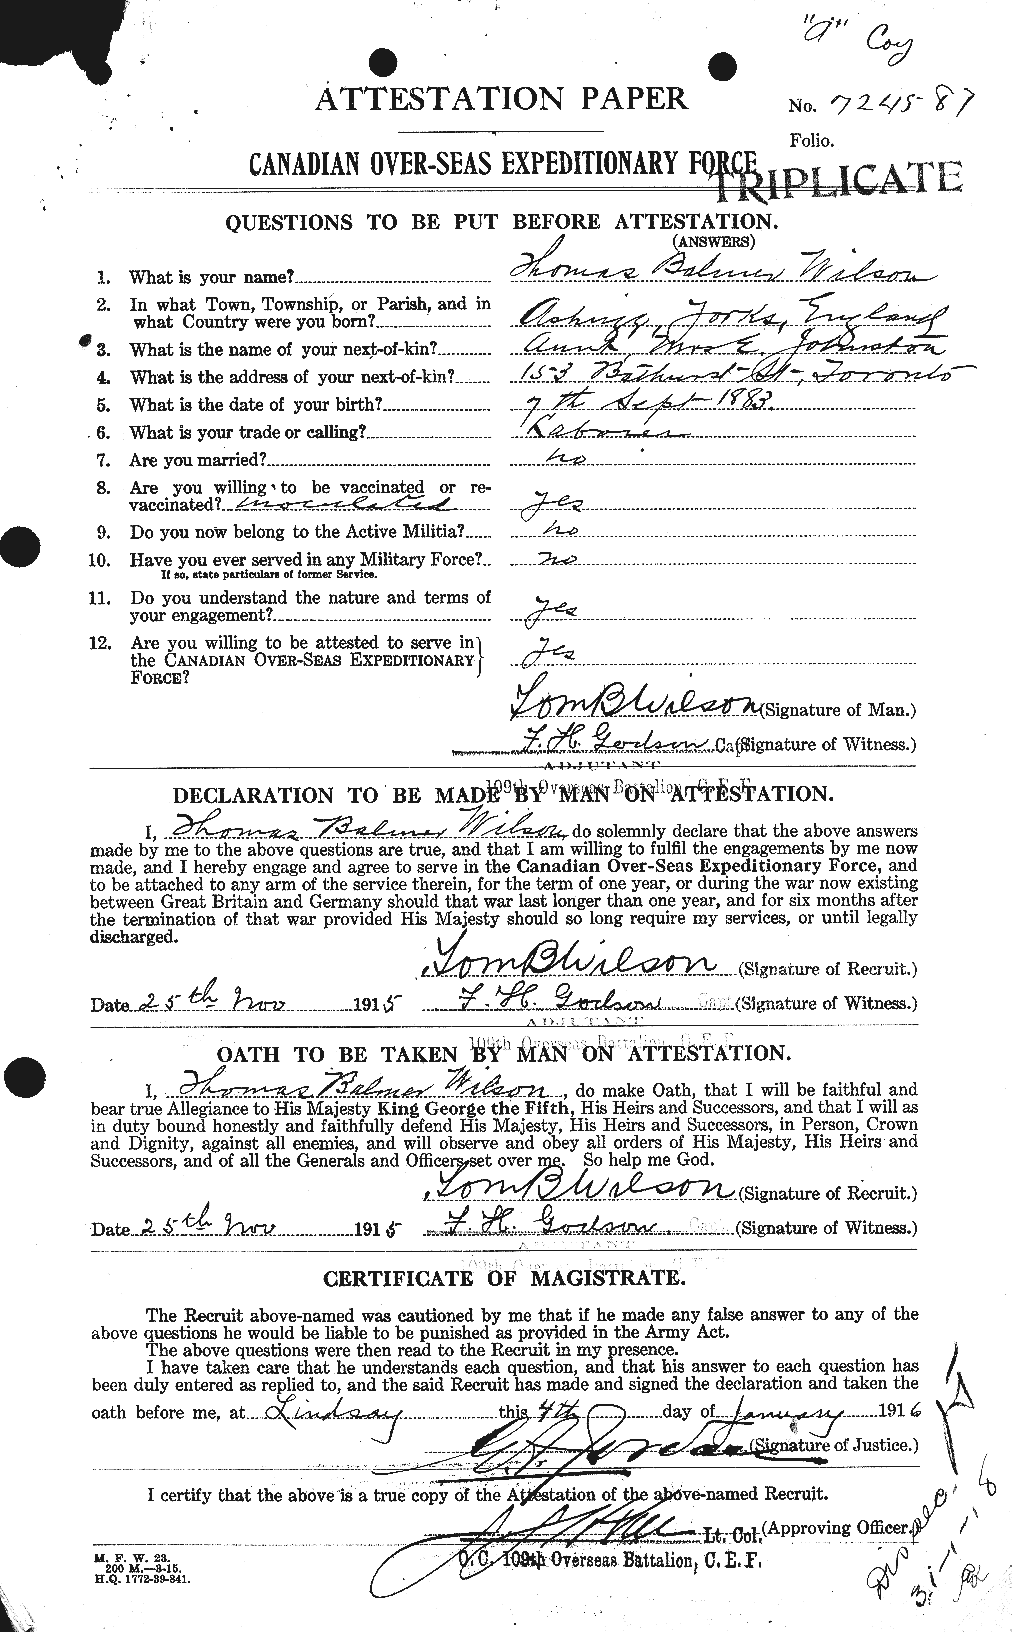 Personnel Records of the First World War - CEF 681238a